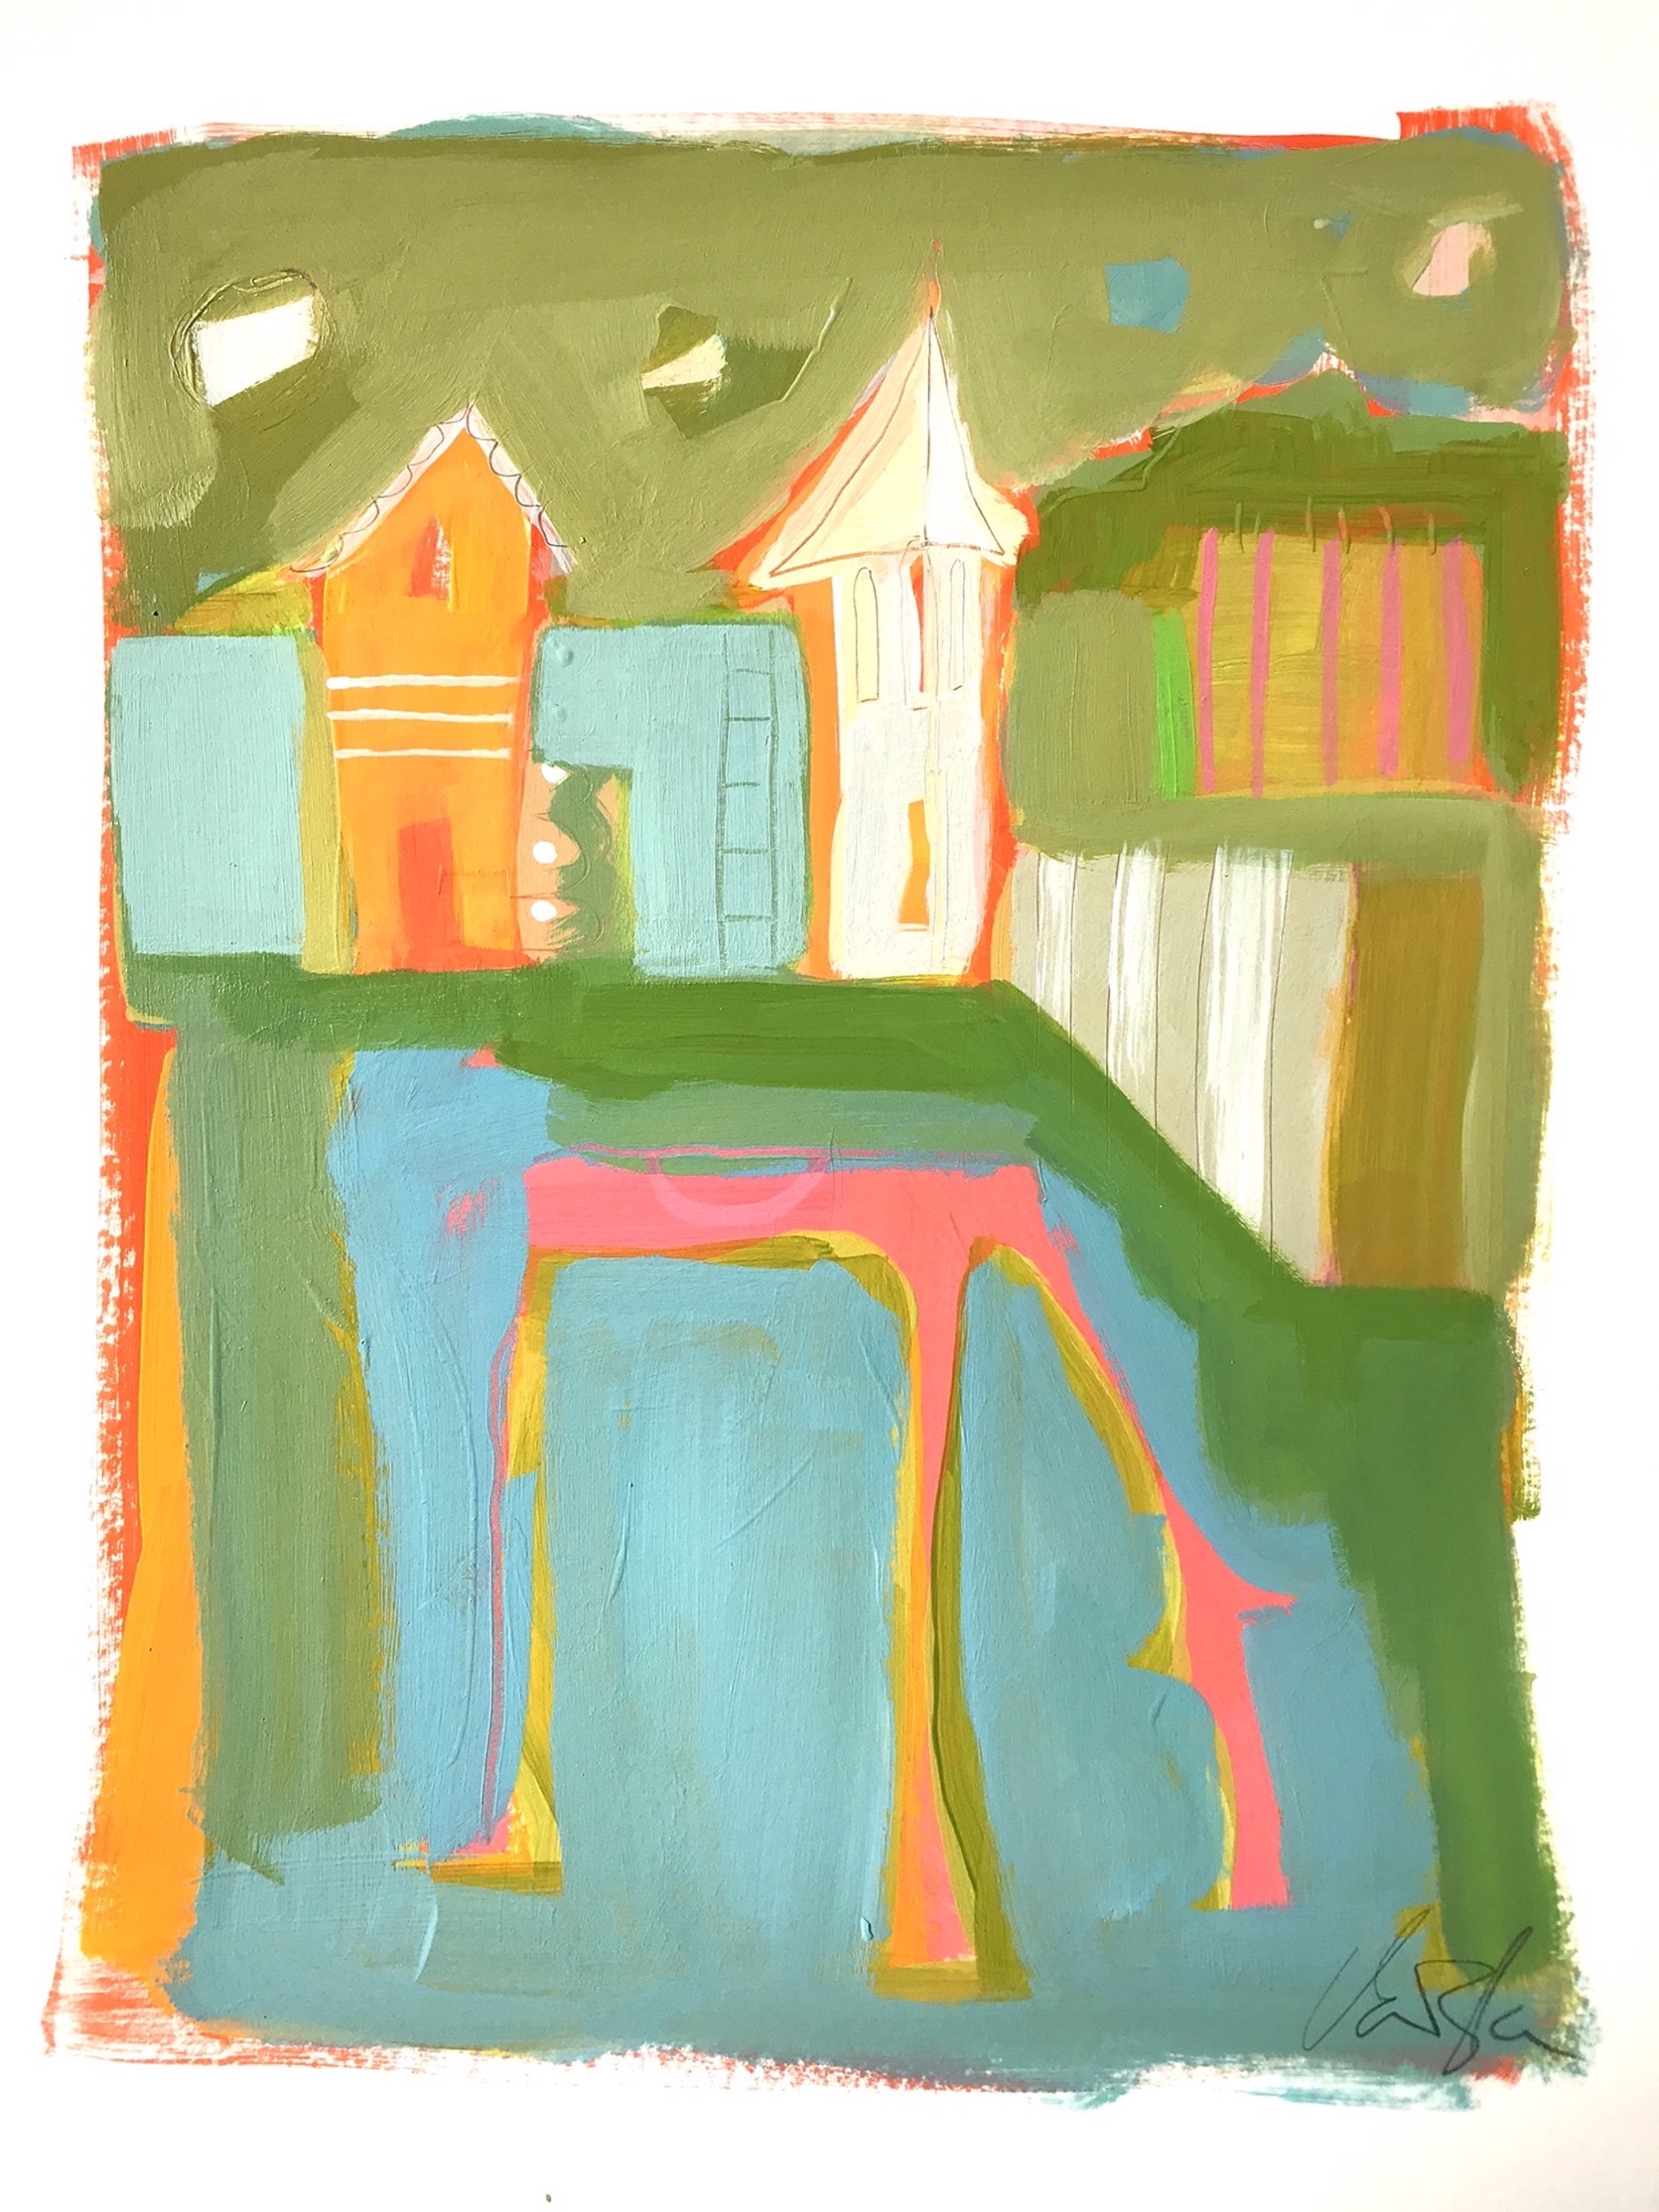 Two Cottages and Pink Horse by Rachael Van Dyke